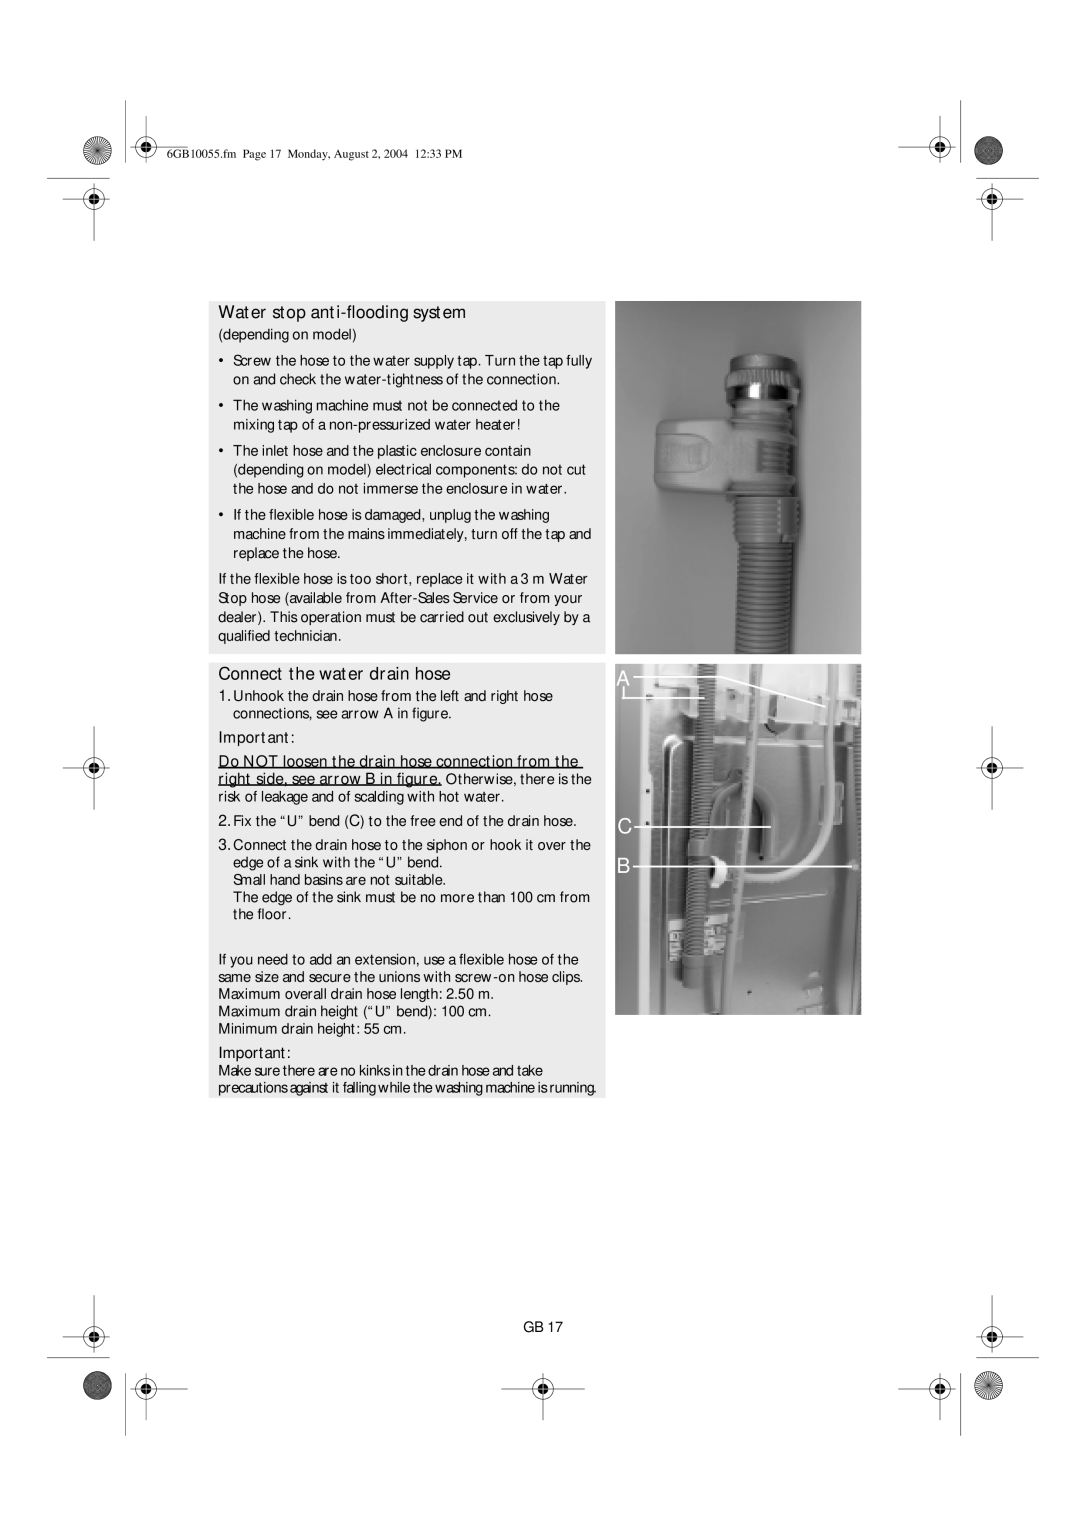 Smeg S600TL manual Water stop anti-flooding system, Connect the water drain hose 